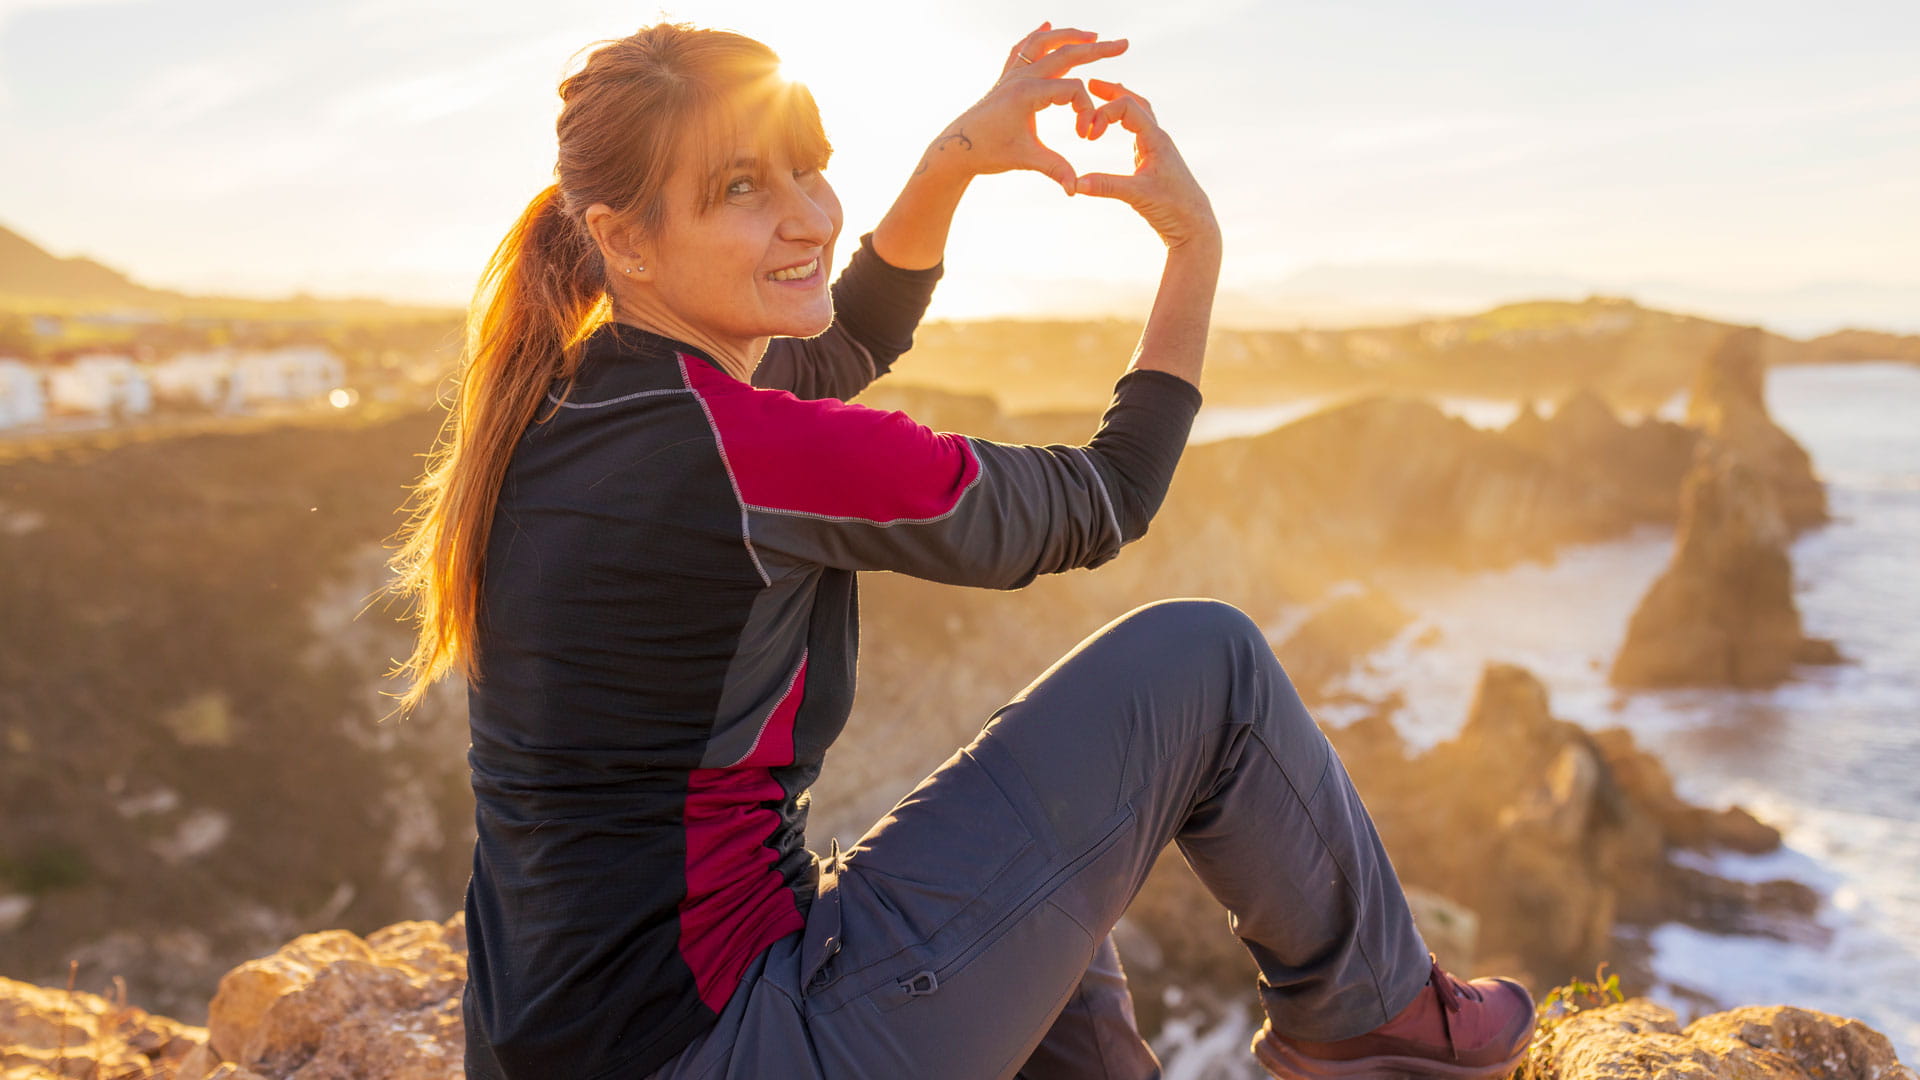 How to improve your heart health after 40